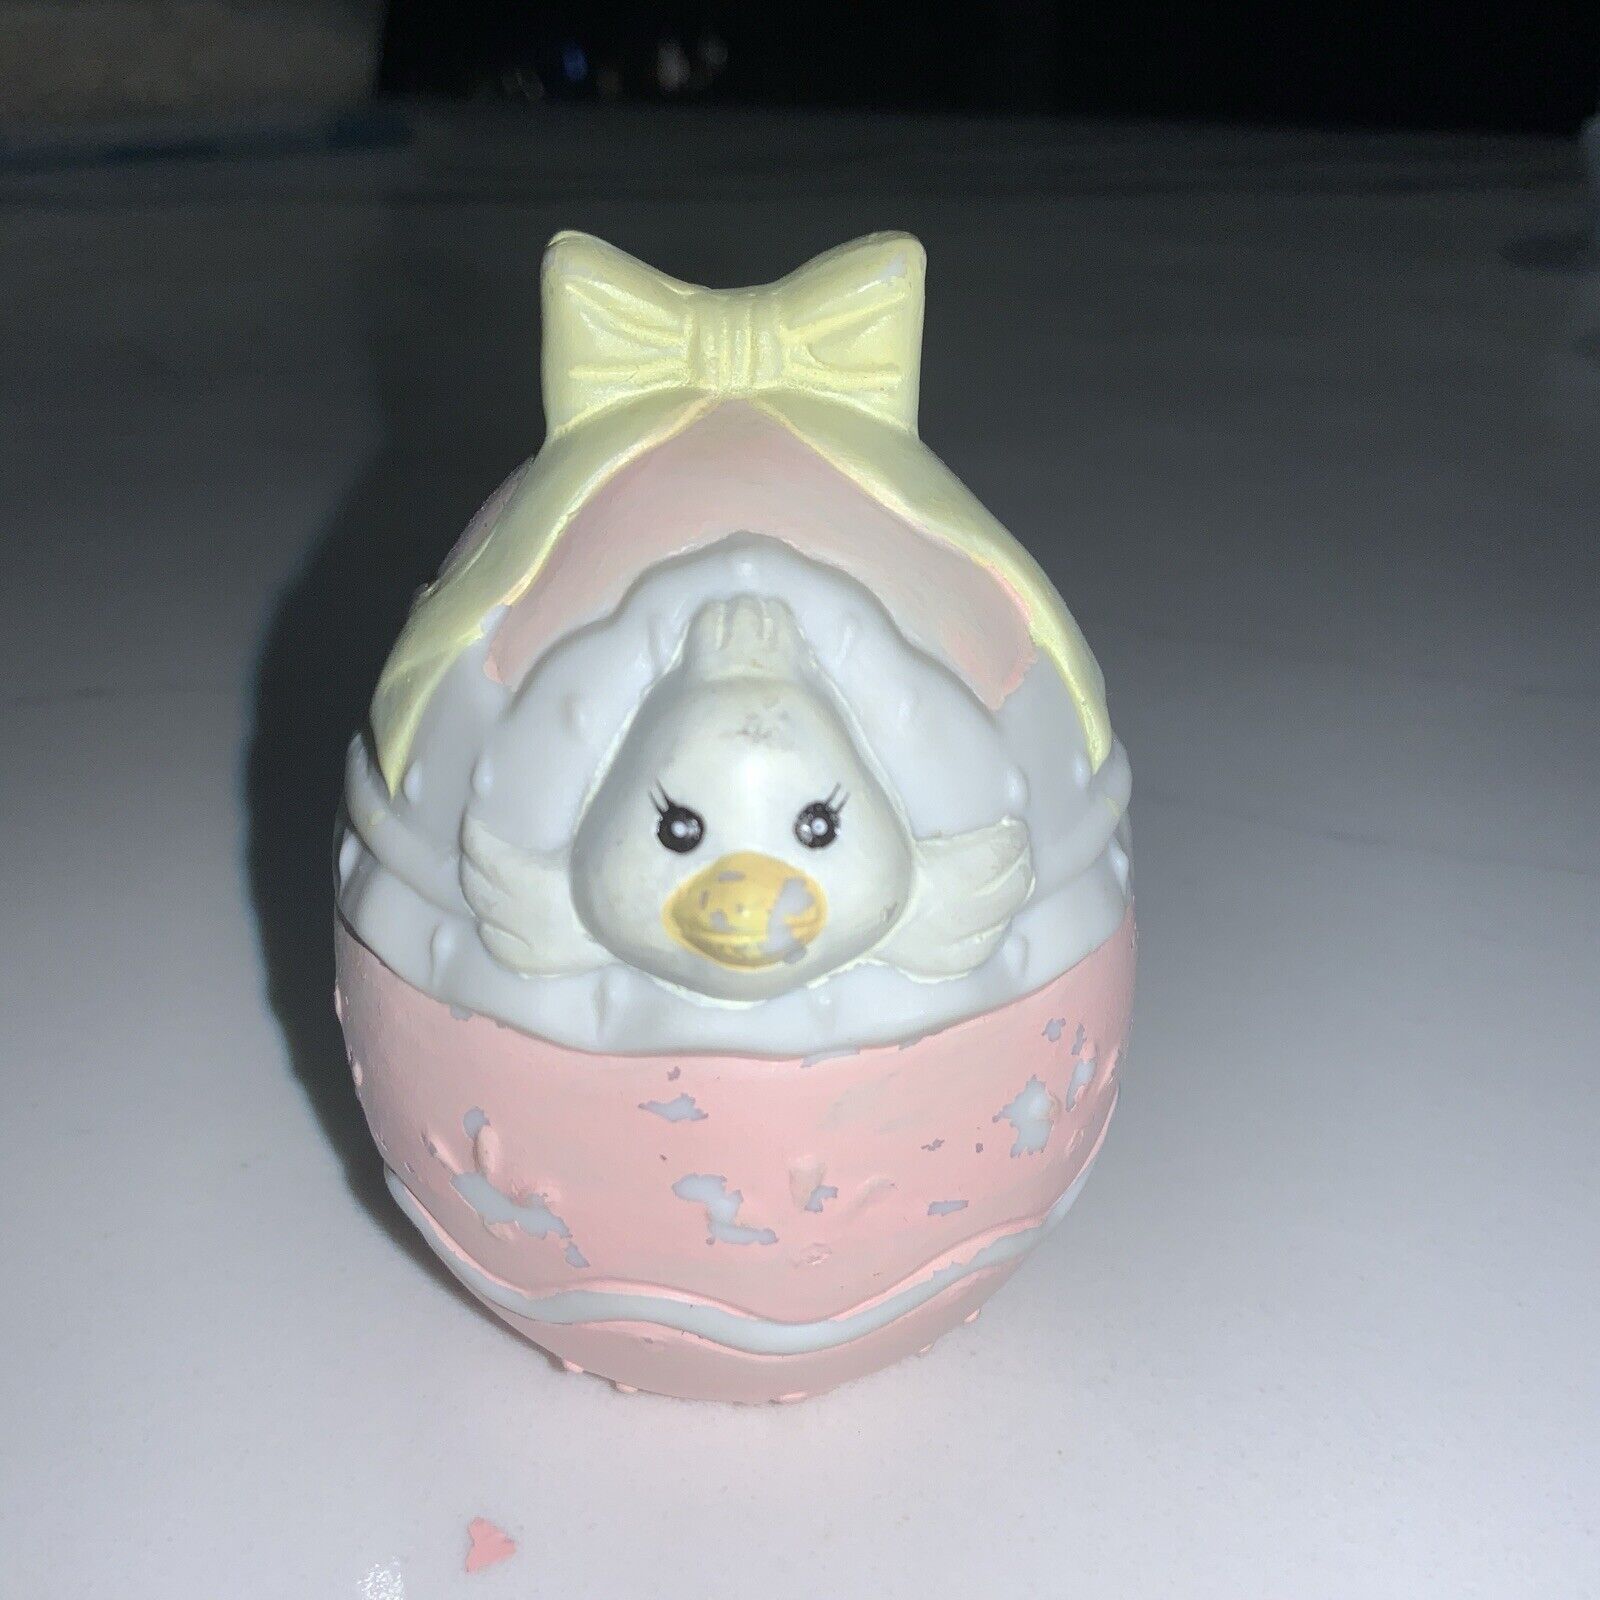 Vintage: Hand Painted Porcelain Egg with Duck - Pink, White, with Yellow Ribbon